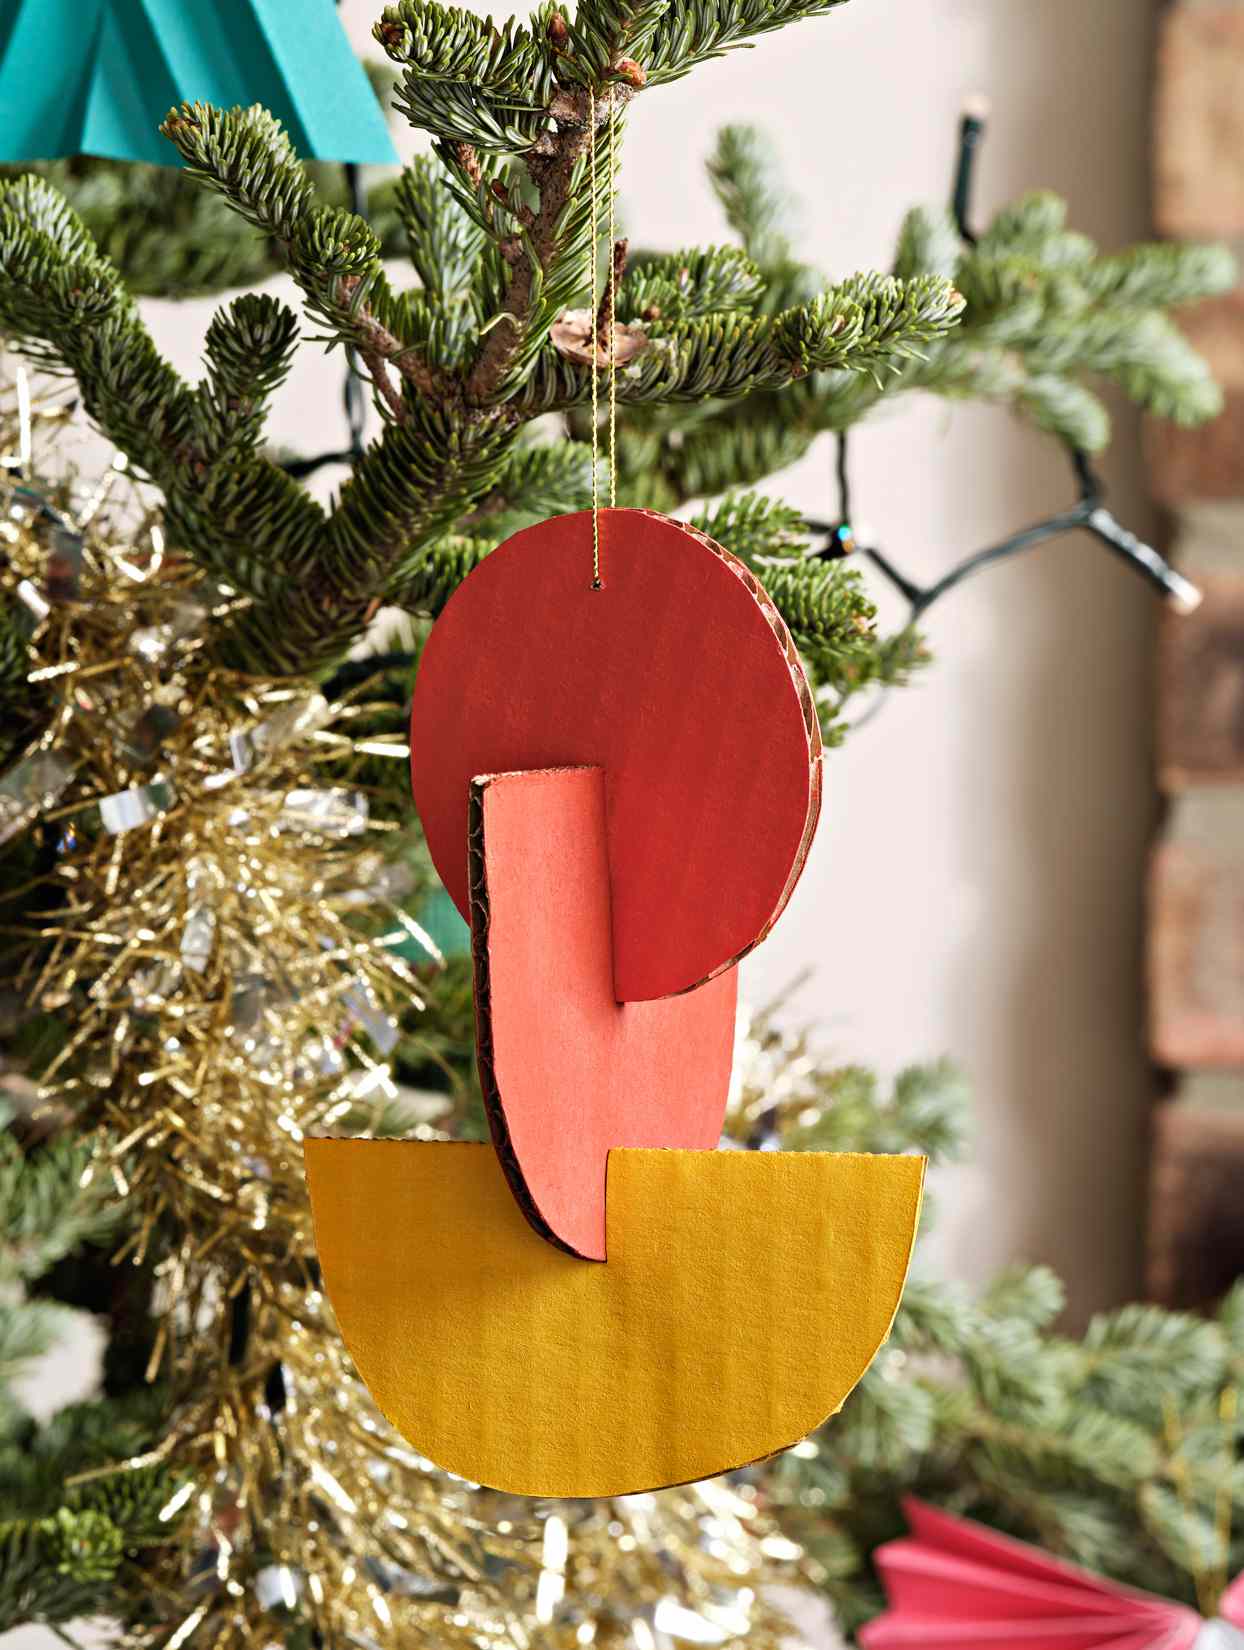 painted cardboard ornaments